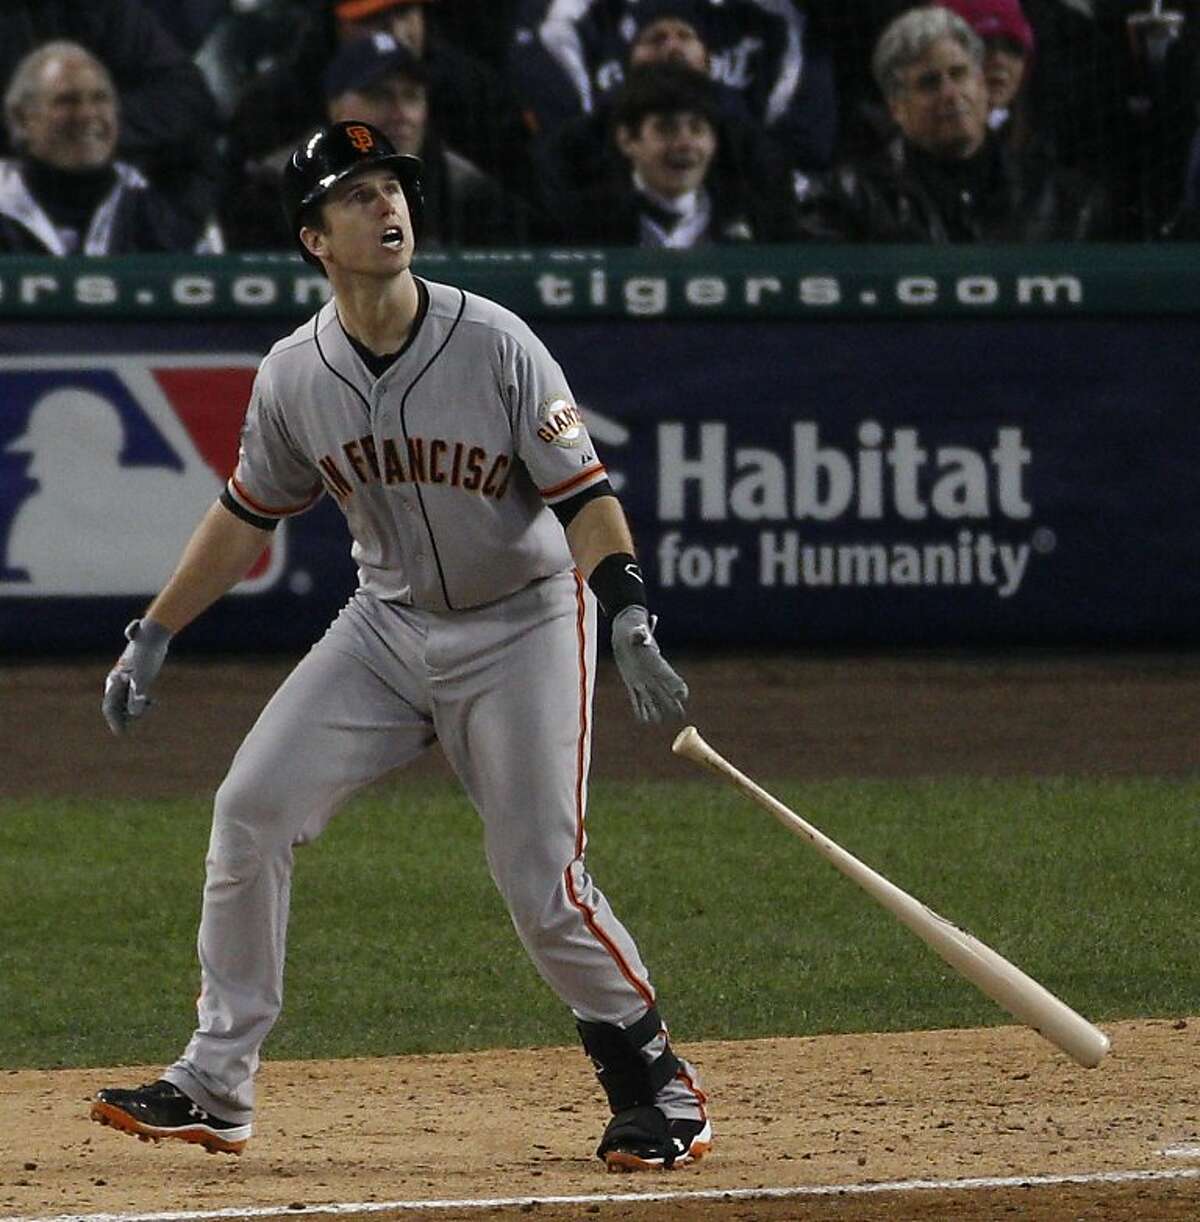 Giants' catcher Buster Posey reacts to his 2-run homer in the 6th inning during the World Series game 4 at Comerica Park in Detroit, MI, on Sunday, Oct. 28, 2012.